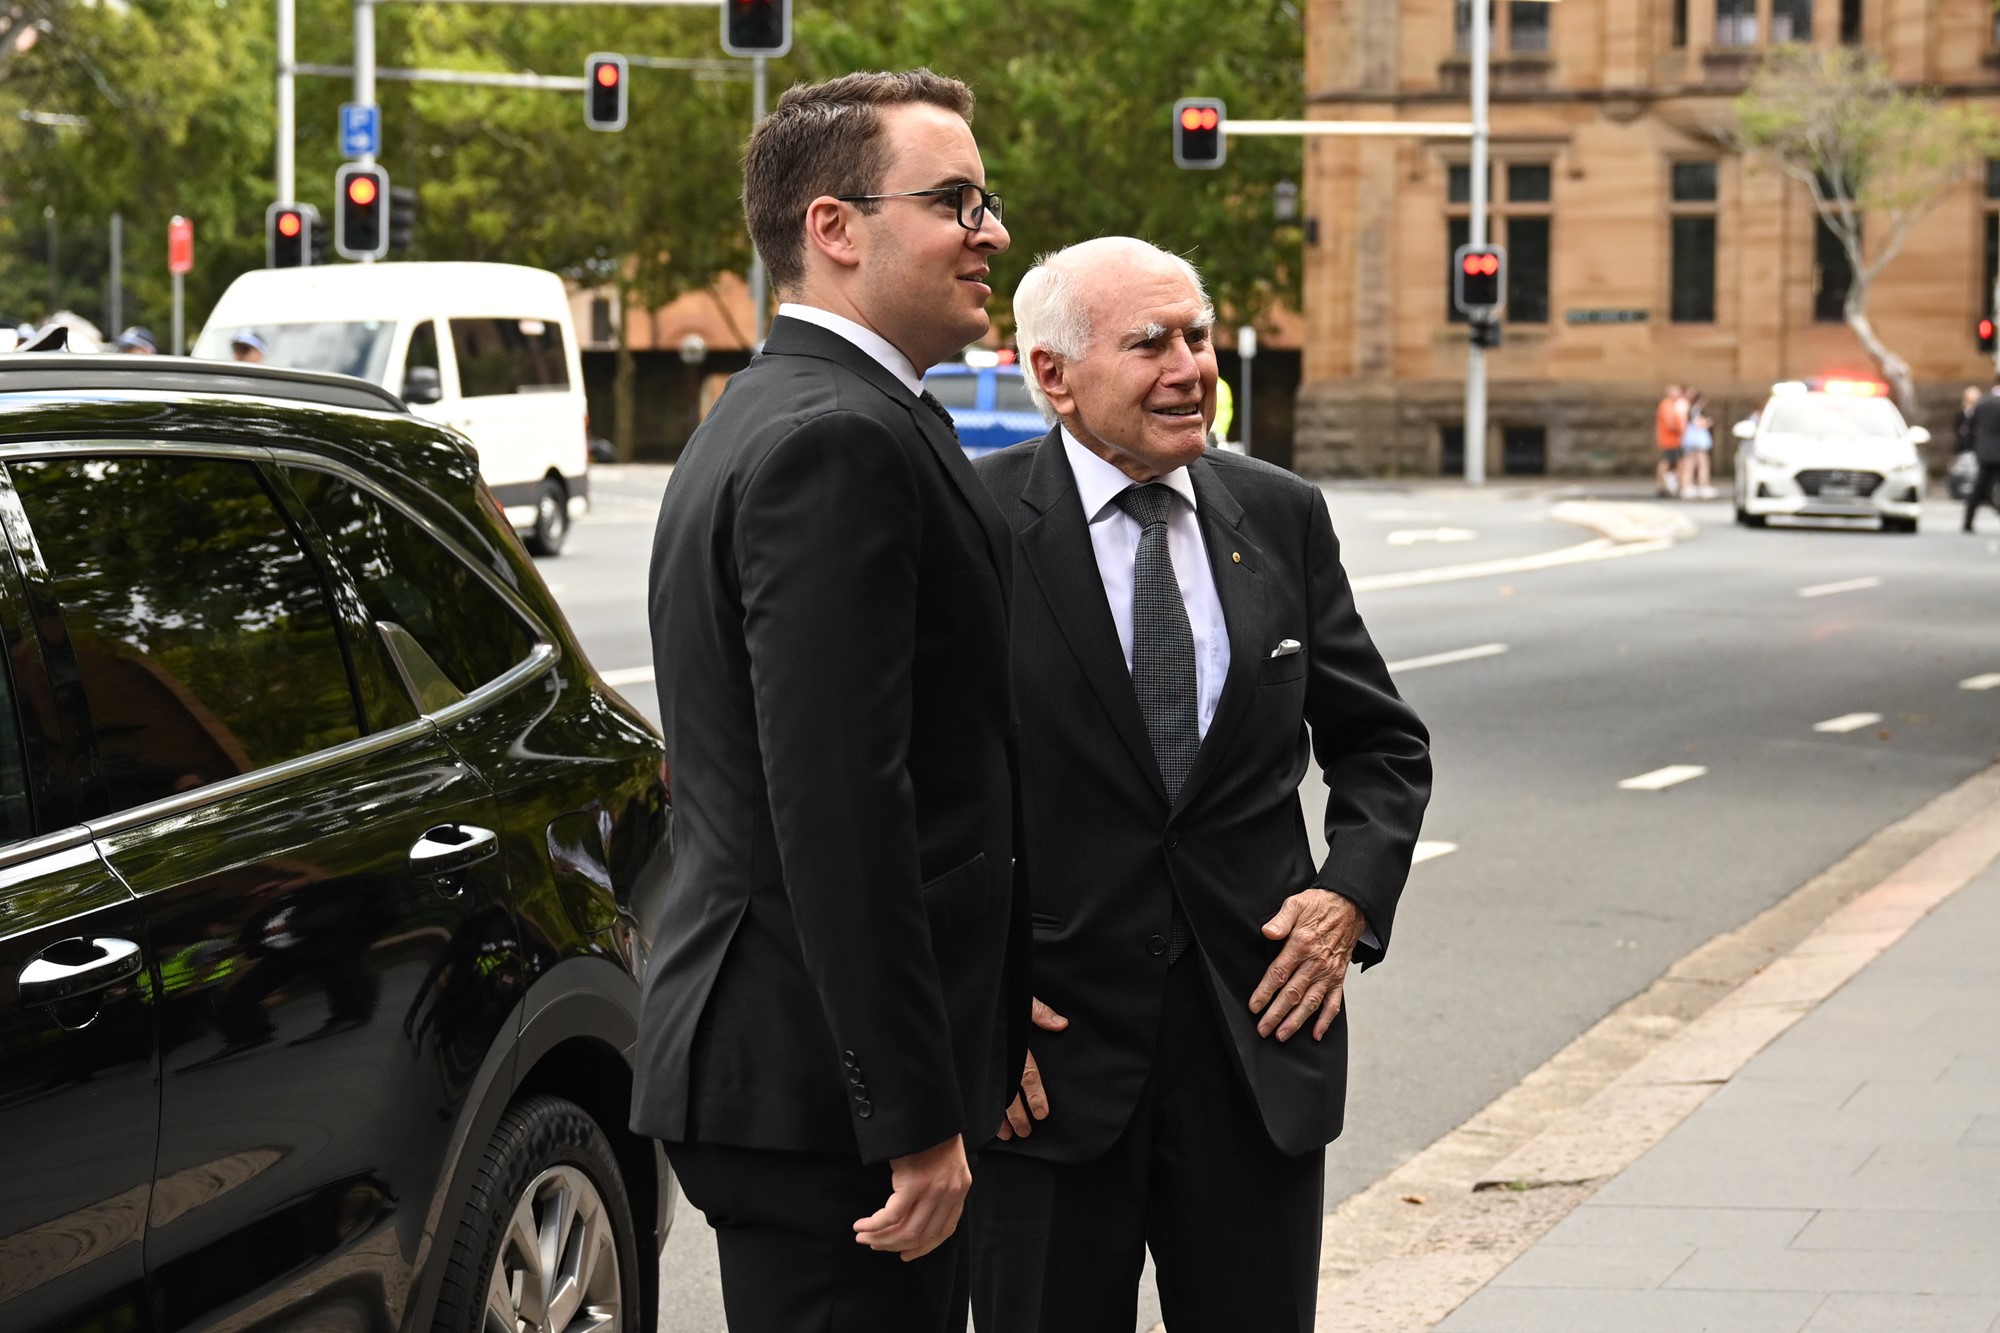 John Howard and another man stand in front of a black car